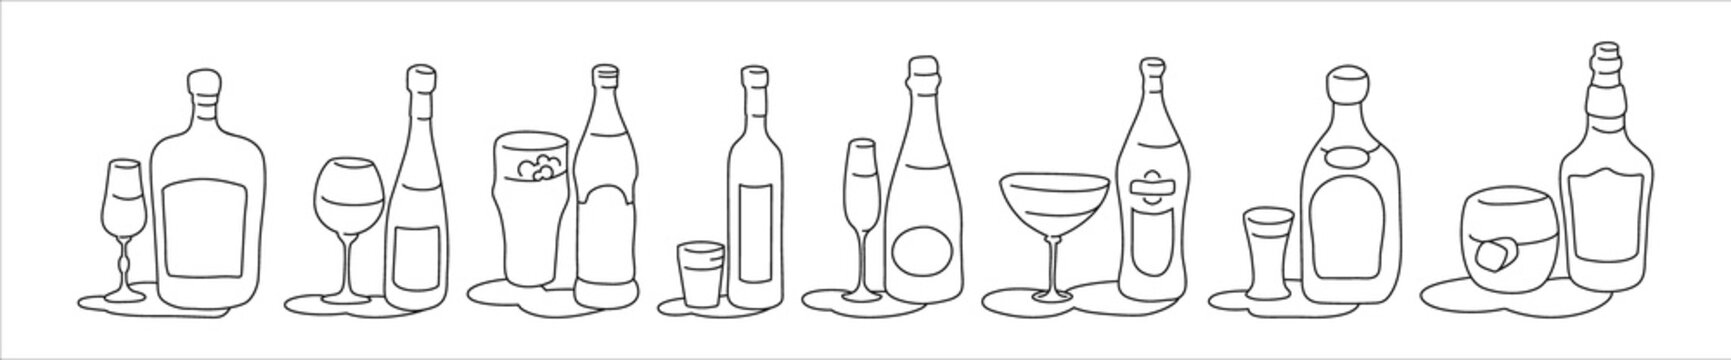 Liquor wine beer vodka champagne vermouth tequila whiskey bottle and glass outline icon on white background. Black white cartoon sketch graphic design. Doodle style. Hand drawn image. Party drinks